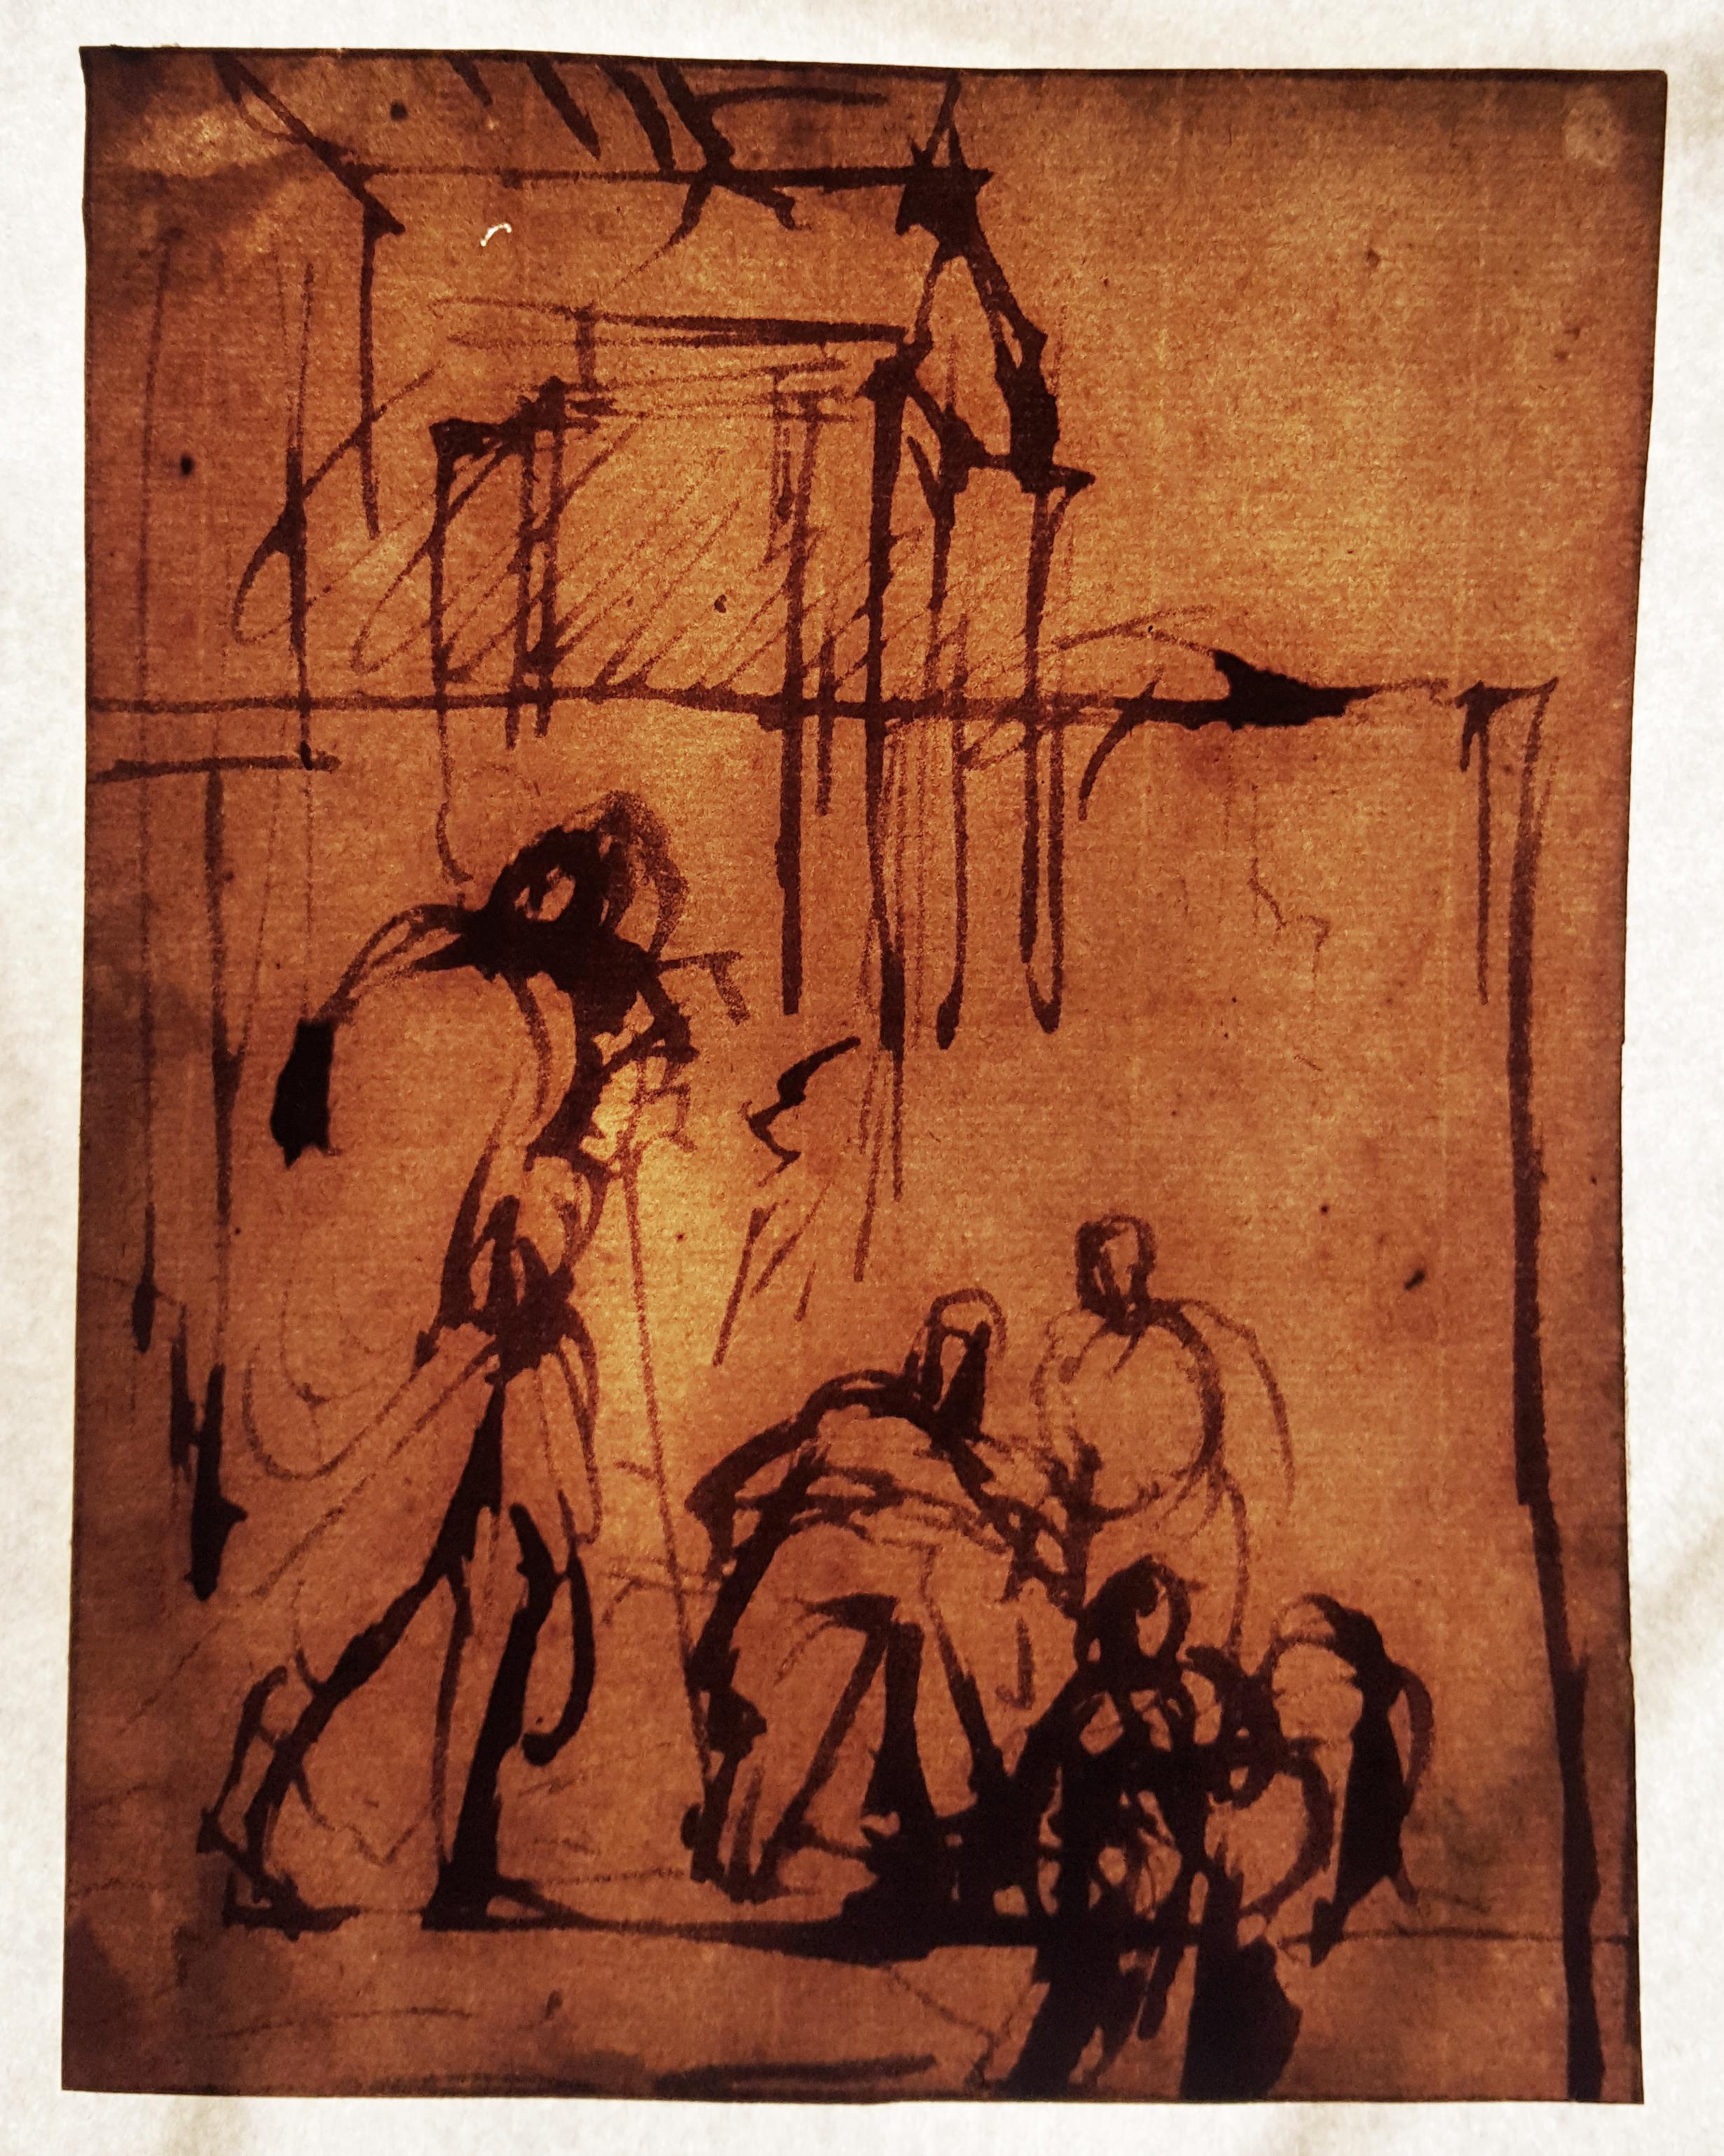 17th Century Old Master Drawing by a Pupil of Rembrandt: Composition Study - Beige Figurative Art by Unknown